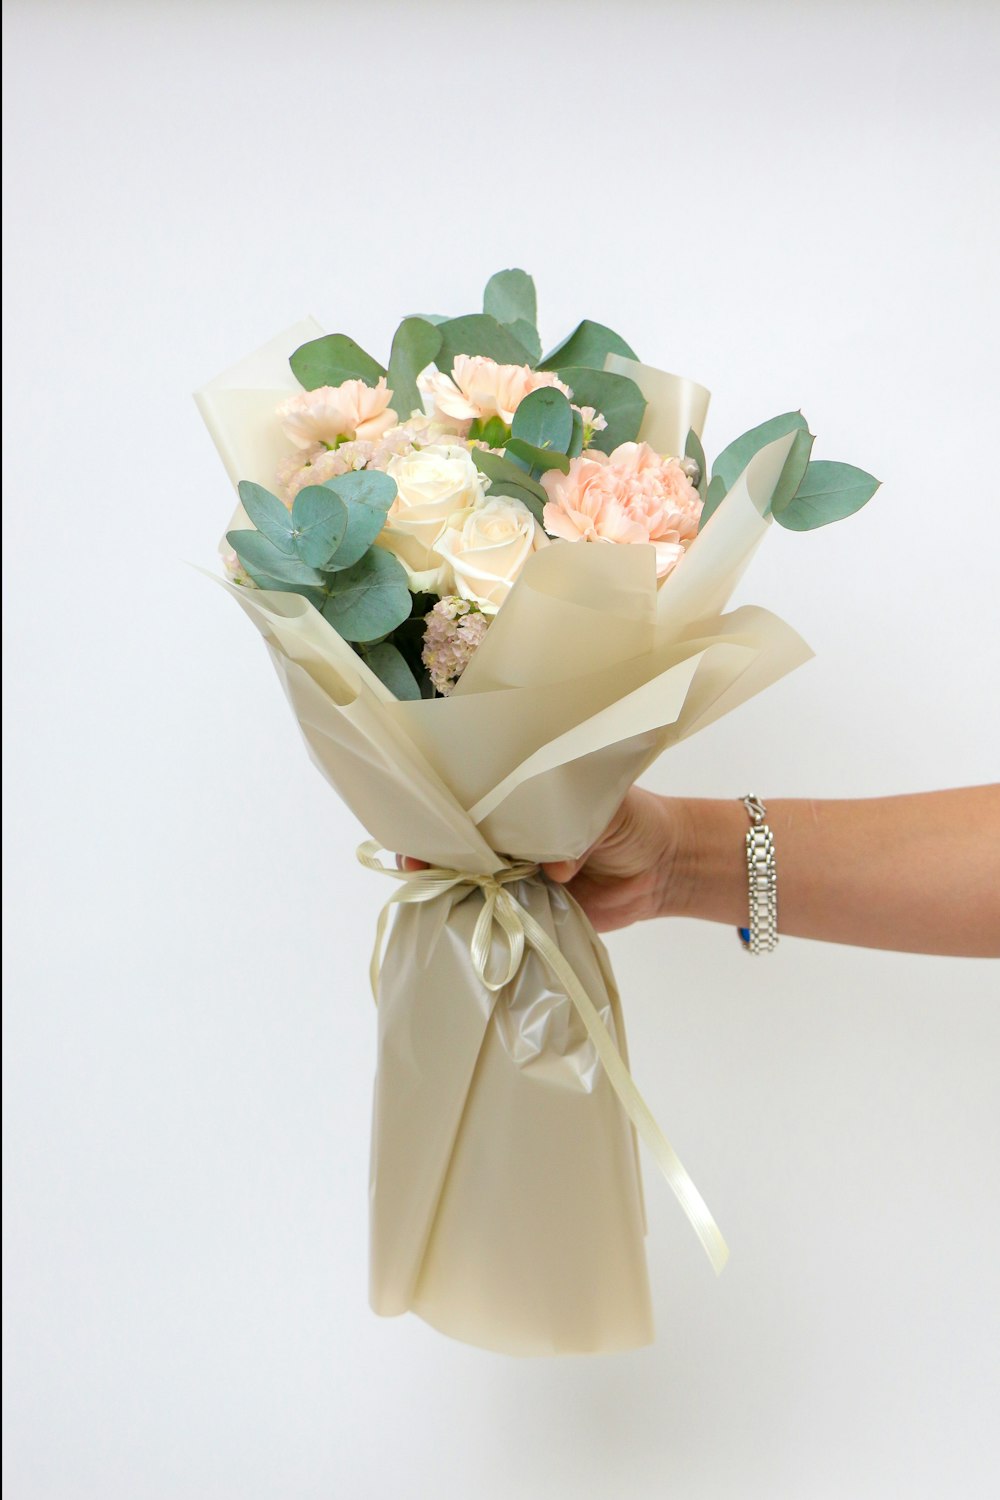 a hand holding a bouquet of flowers